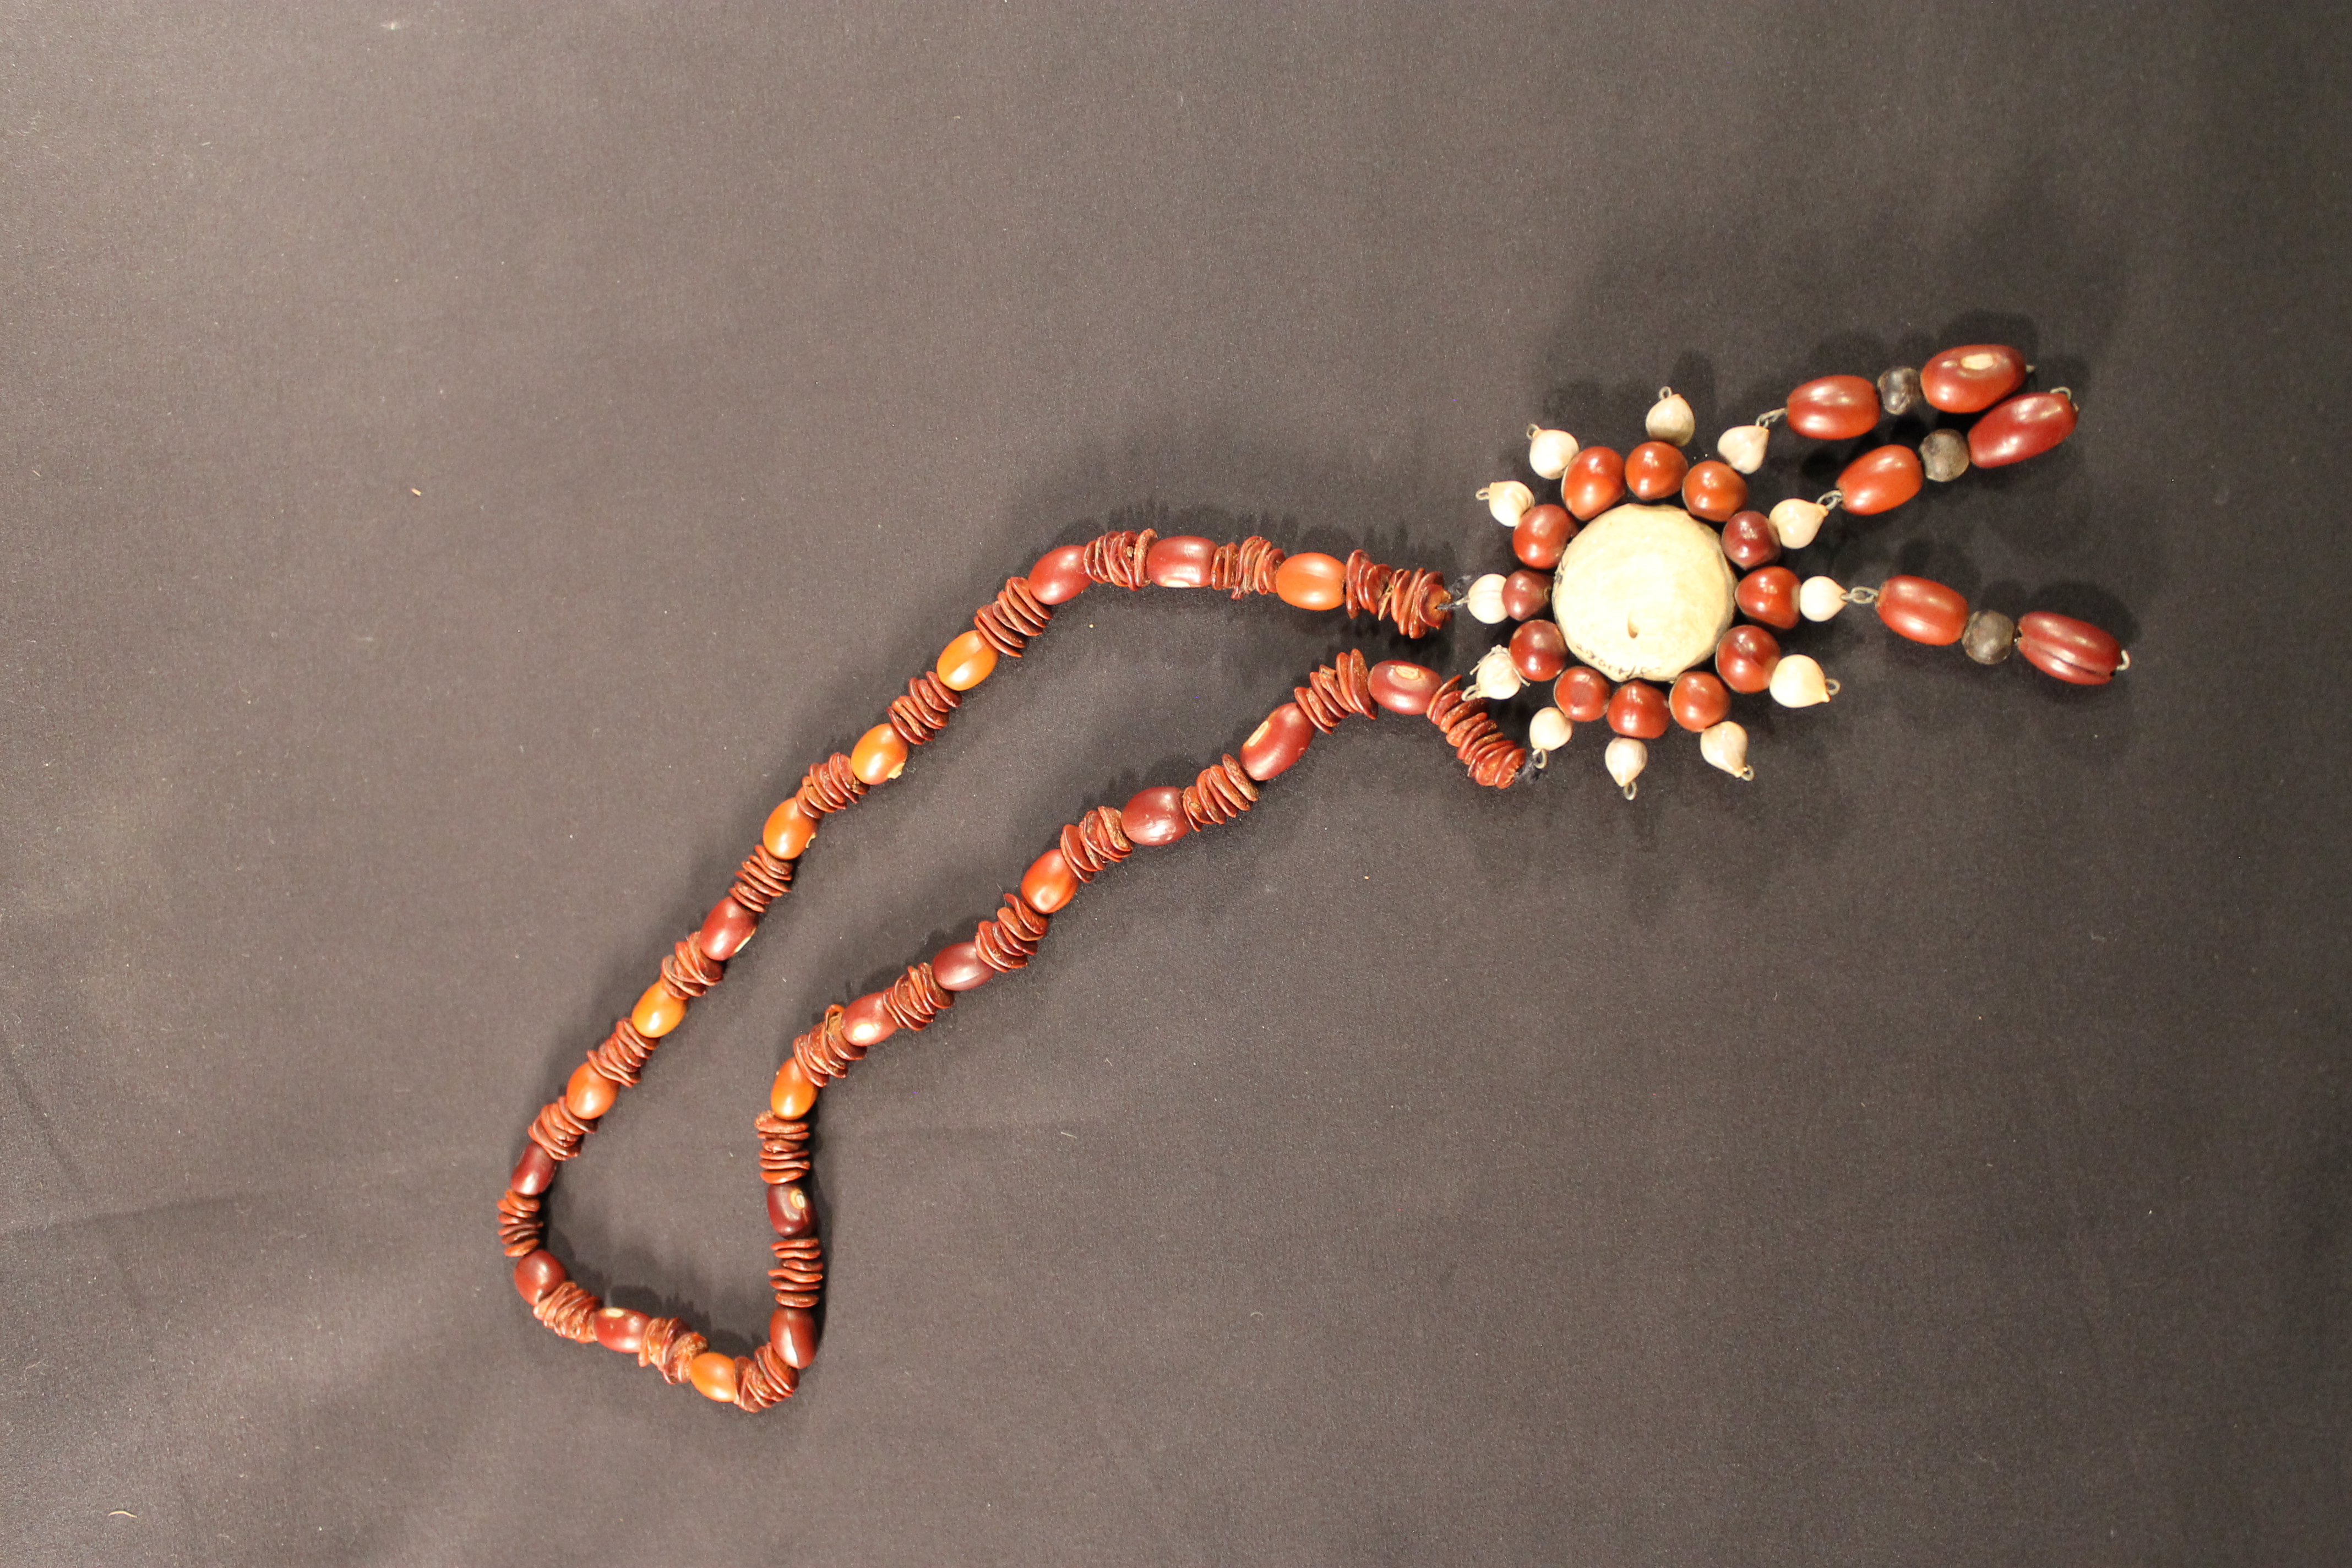 Necklace made of seeds on a string. The center has a larger seed pendant that has three strings hanging off of it with additional beads attached. 